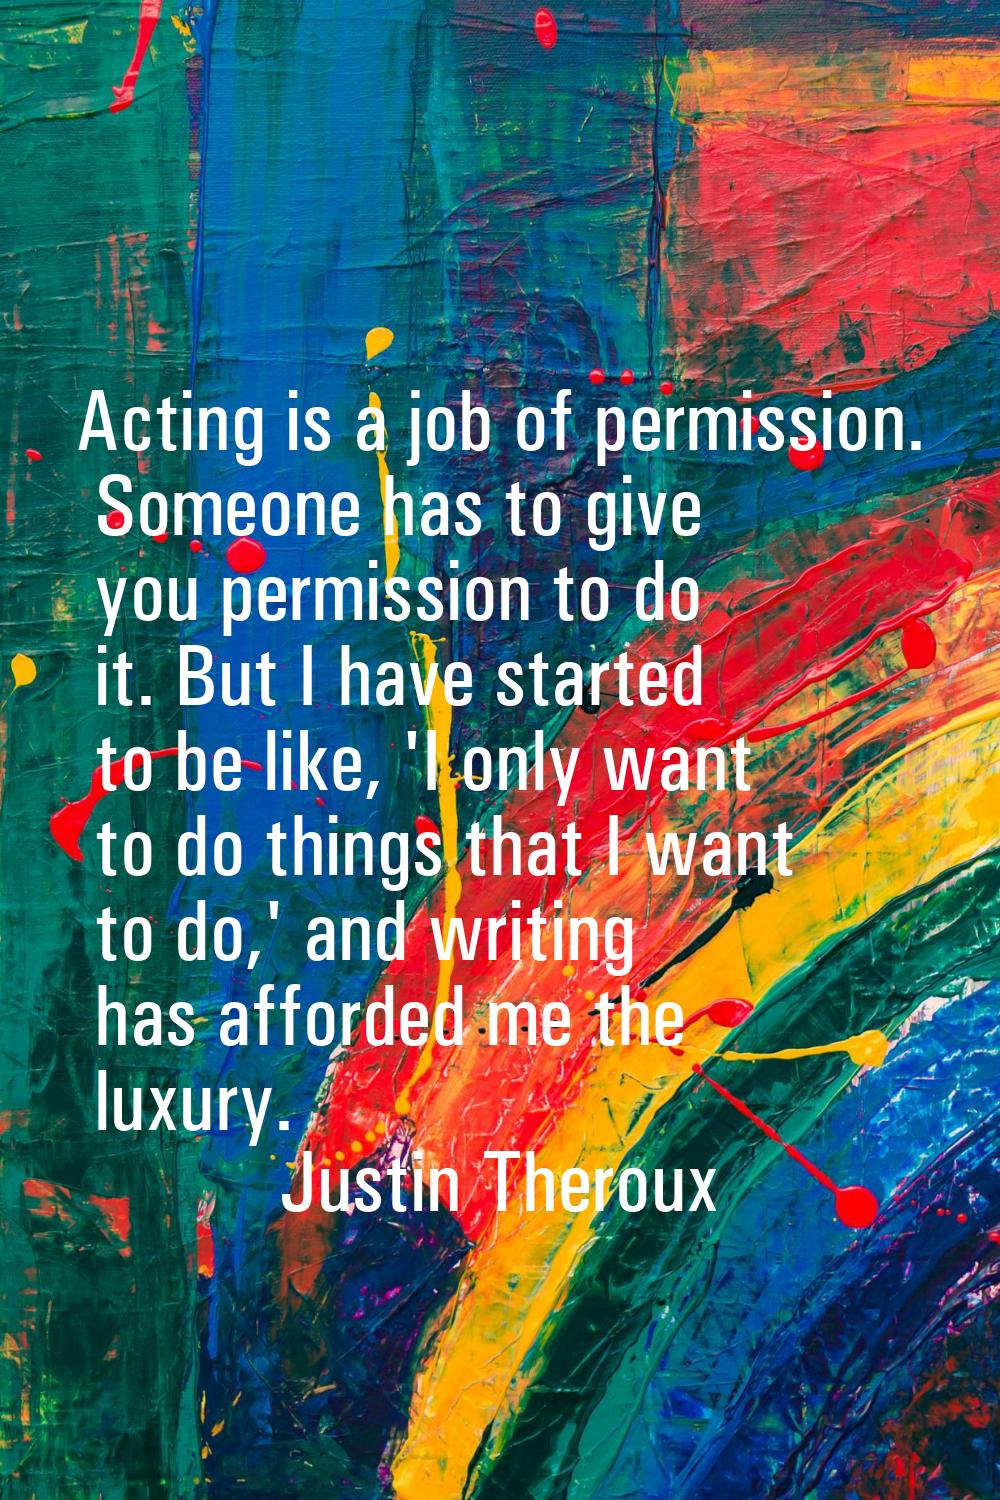 Acting is a job of permission. Someone has to give you permission to do it. But I have started to b